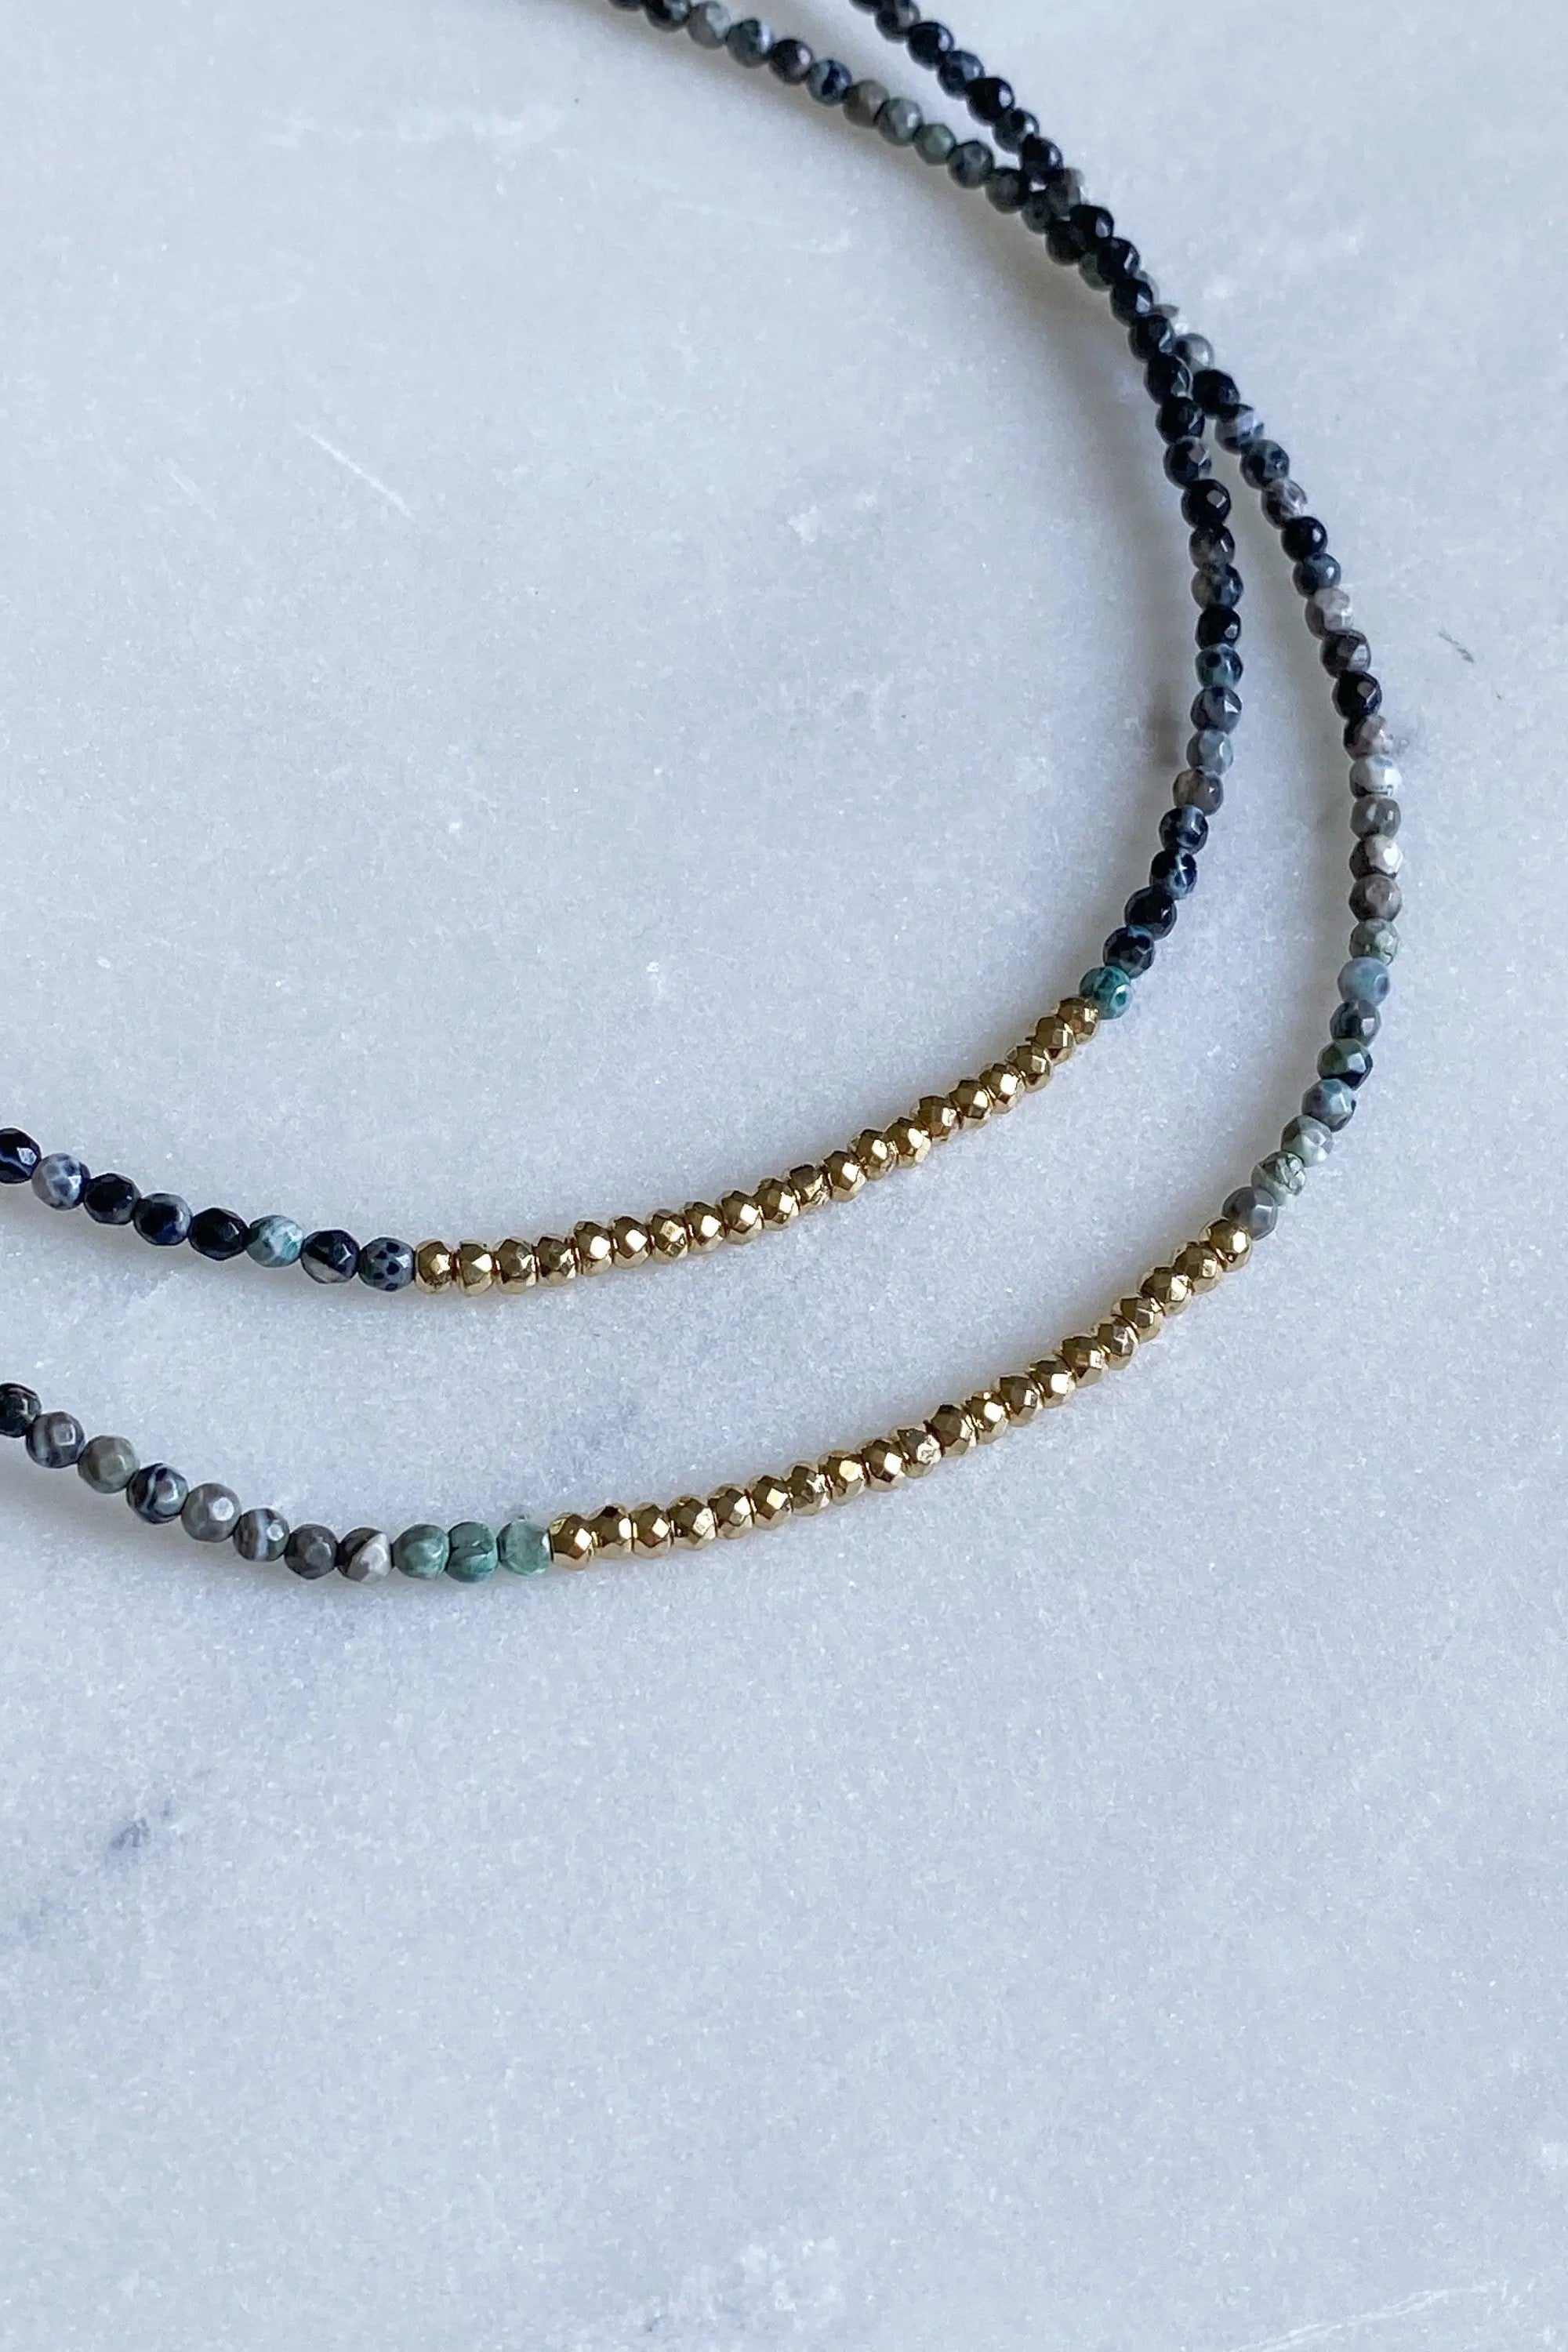 NAFSIKA Agate Beaded Necklace, Heishi surfer necklace,  Dainty choker necklace, Gold hematite layering necklace, Collier pierre boho